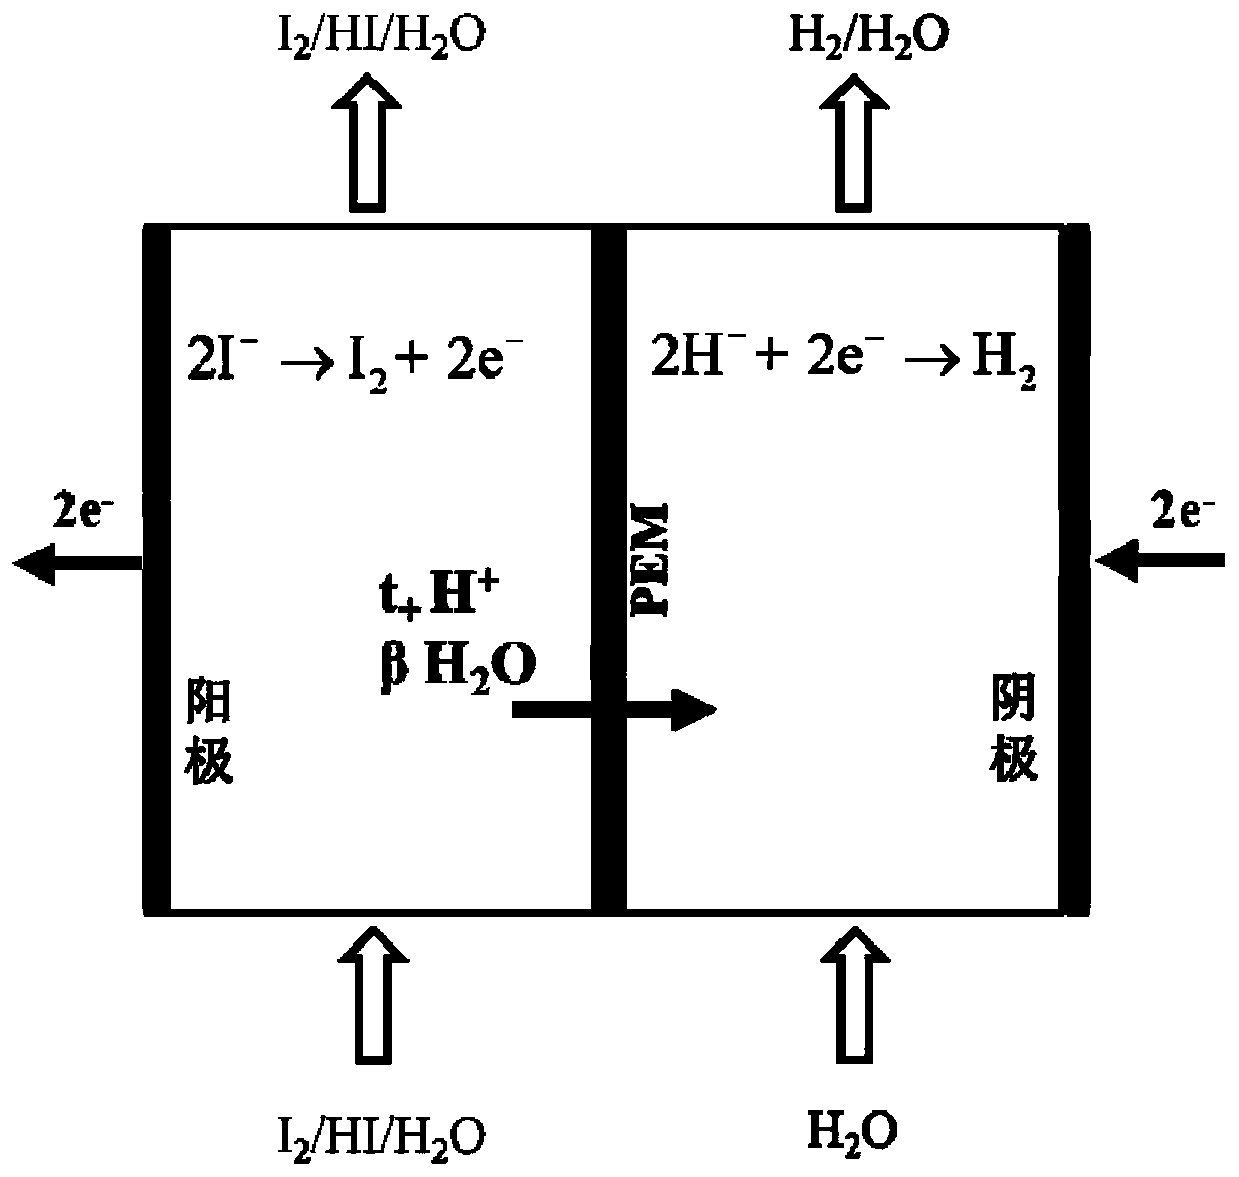 Hydroiodic acid electrolysis modeling and process simulation method for sulfur-iodine cycle hydrogen production